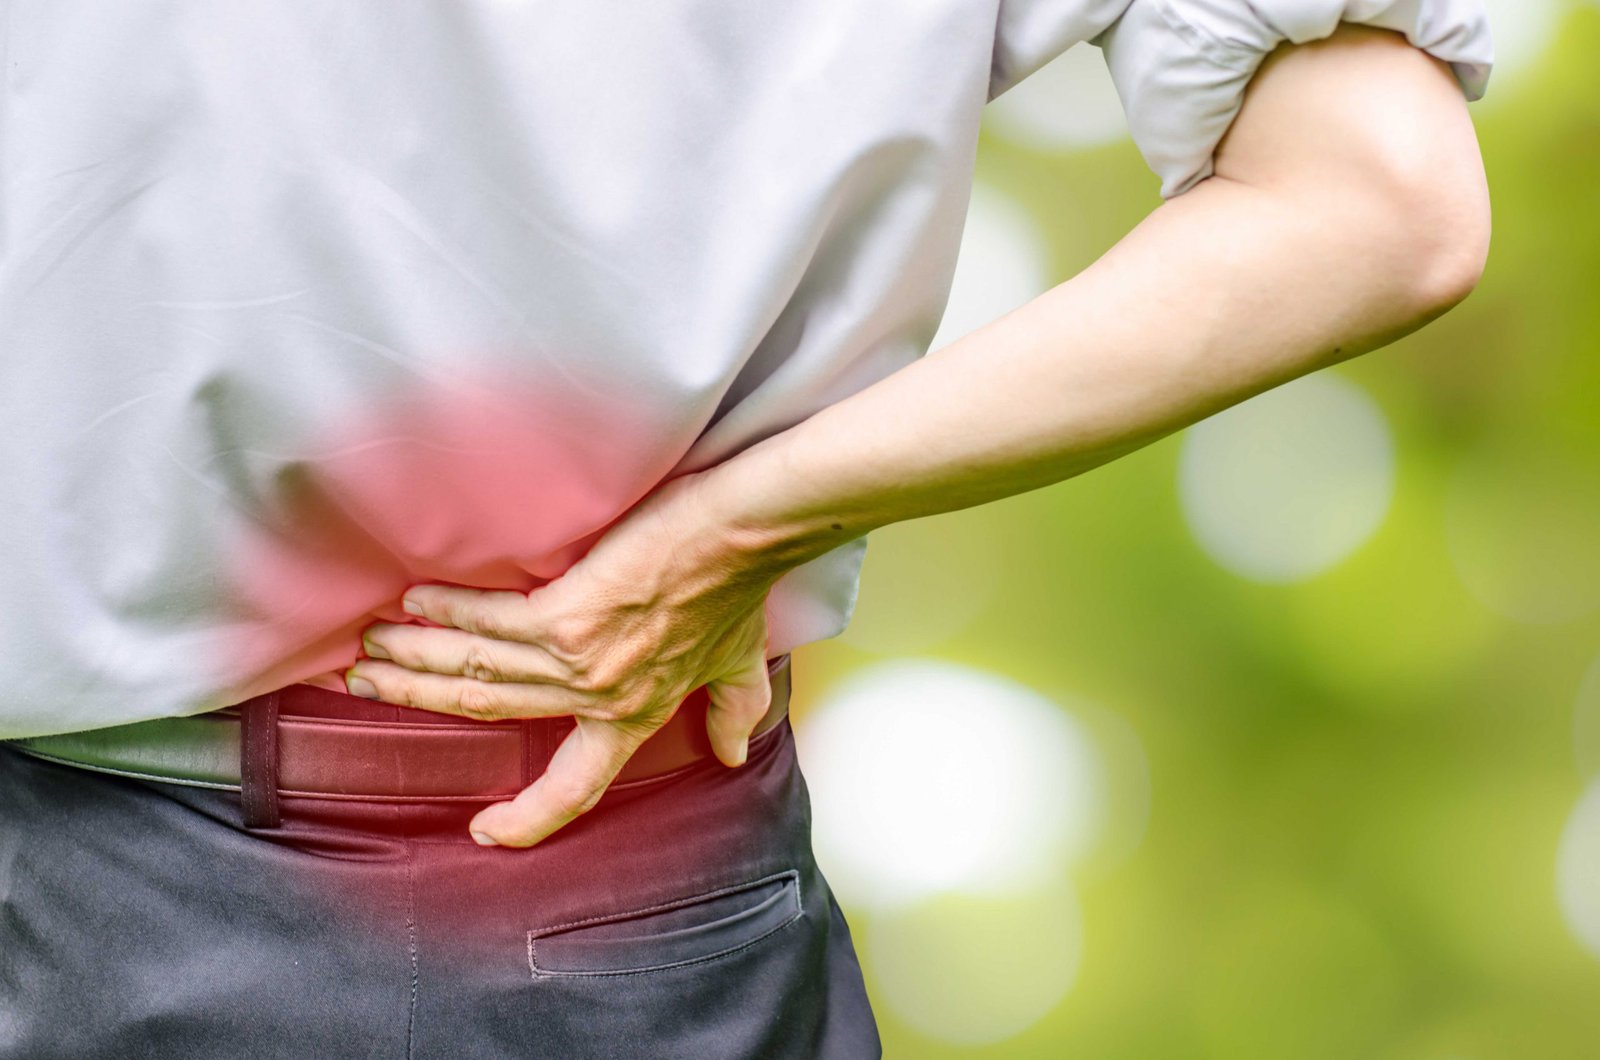 How do you know when back pain is serious?